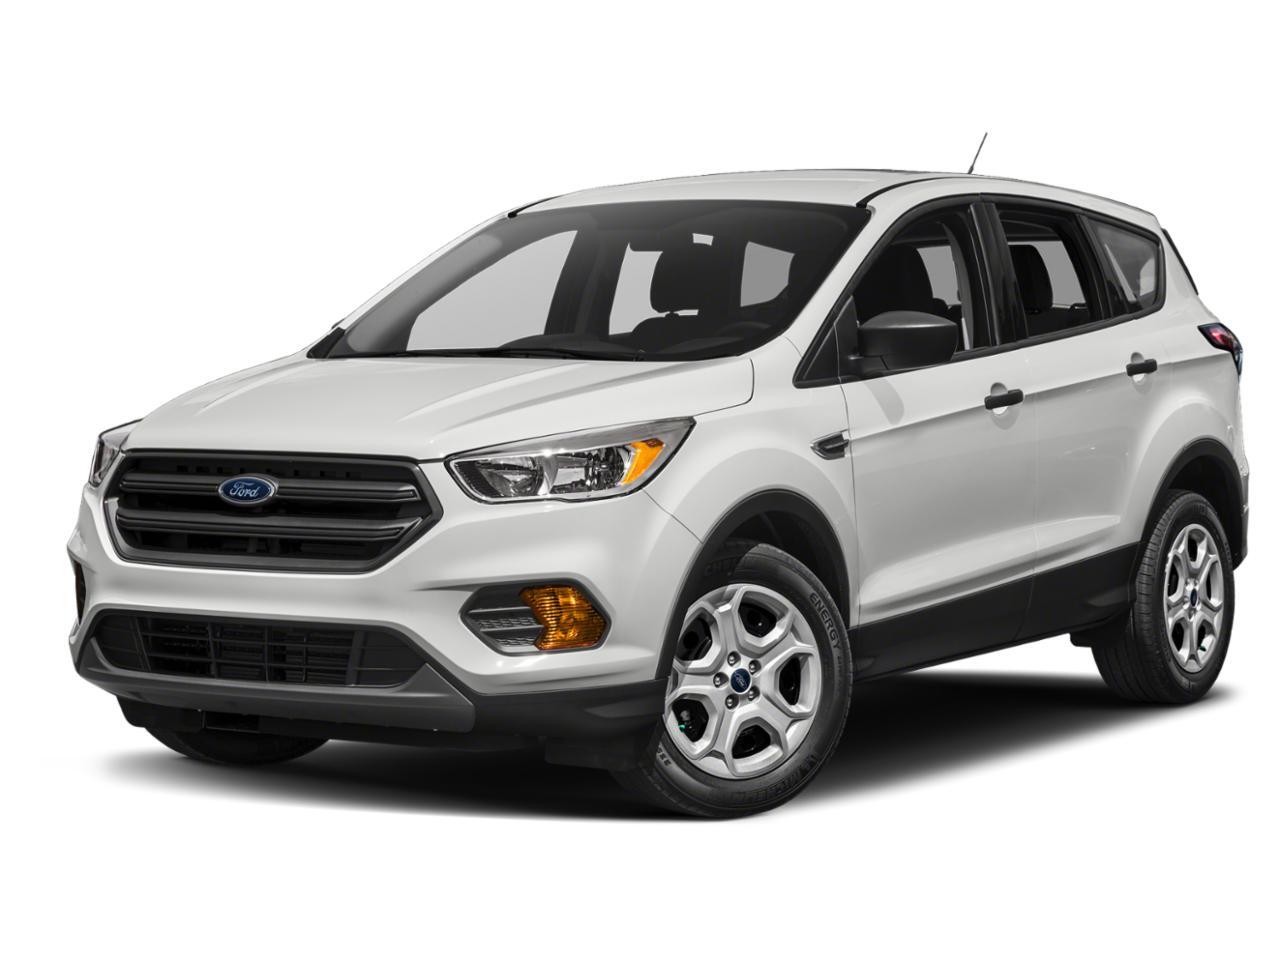 2018 Ford Escape | S | Sunroof | Heated Seats | Advanced Safety |